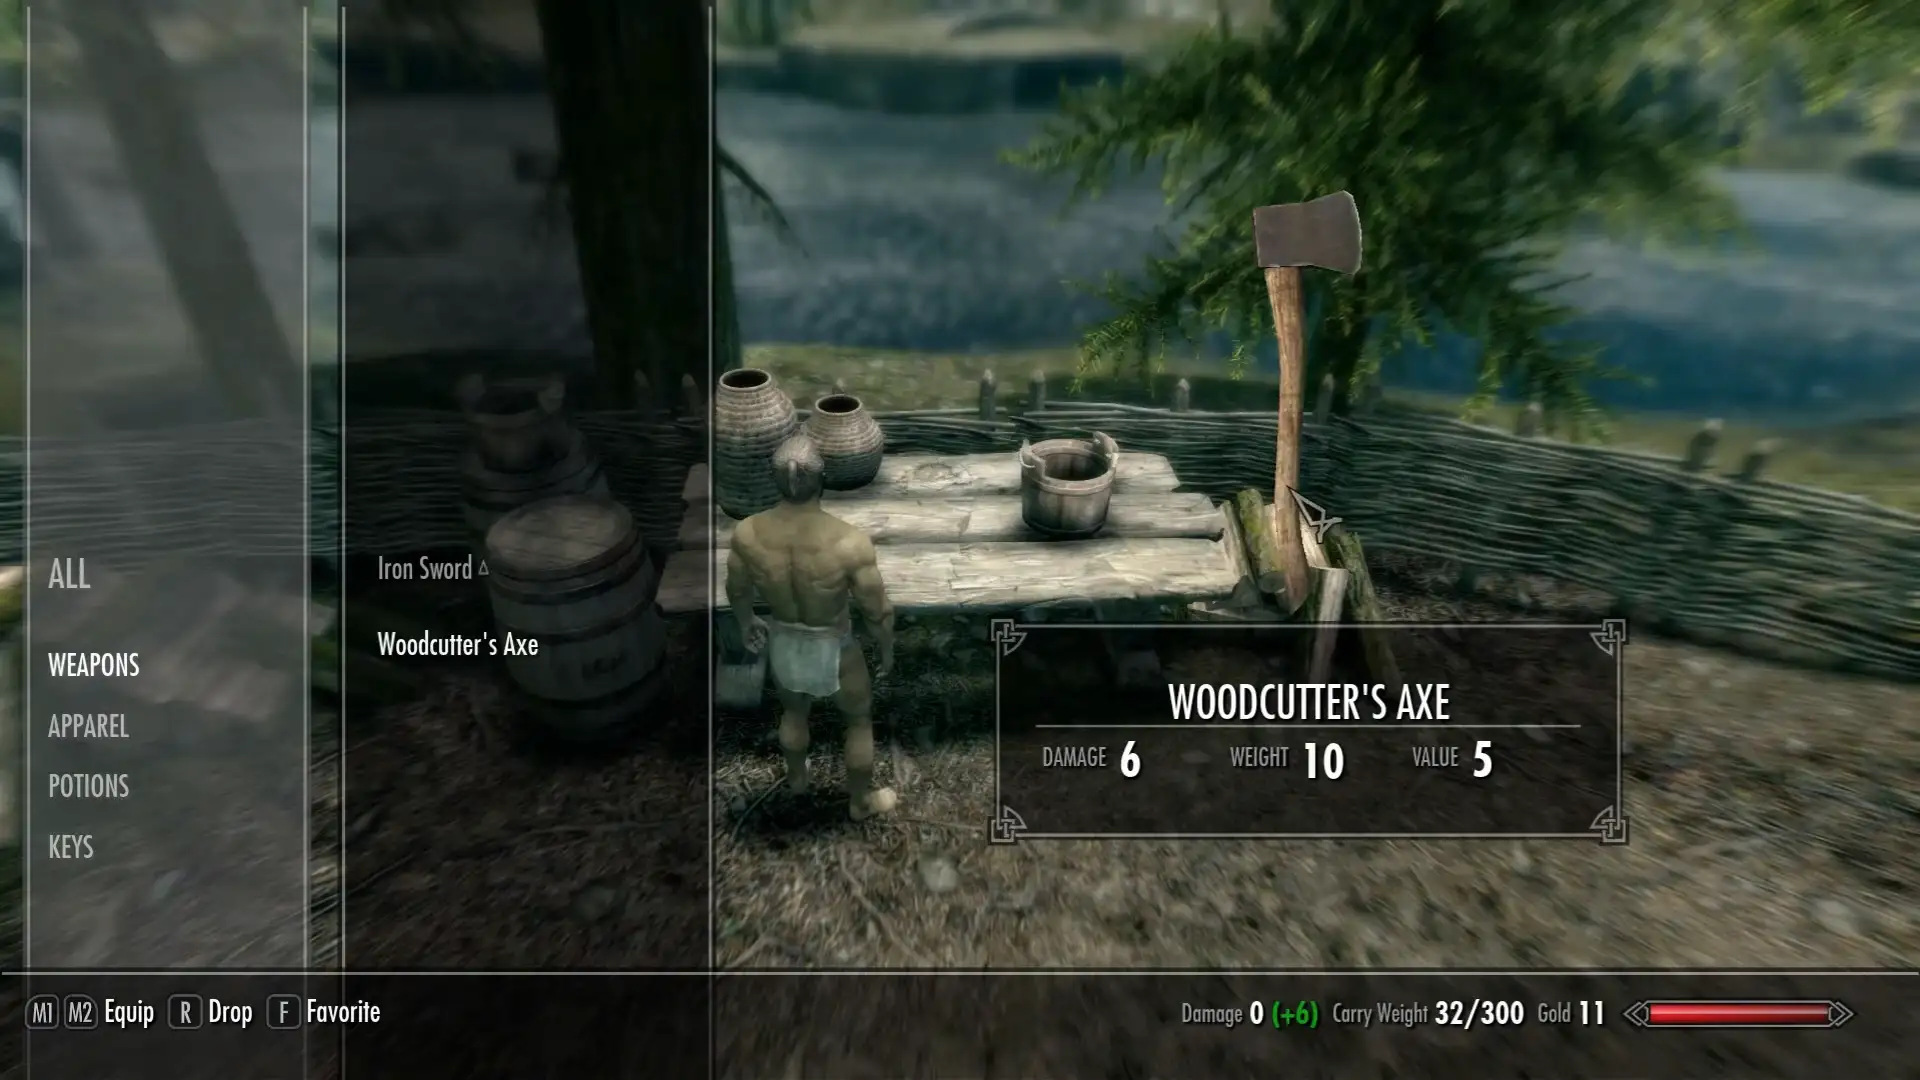 Woodcutter's Axe in Game